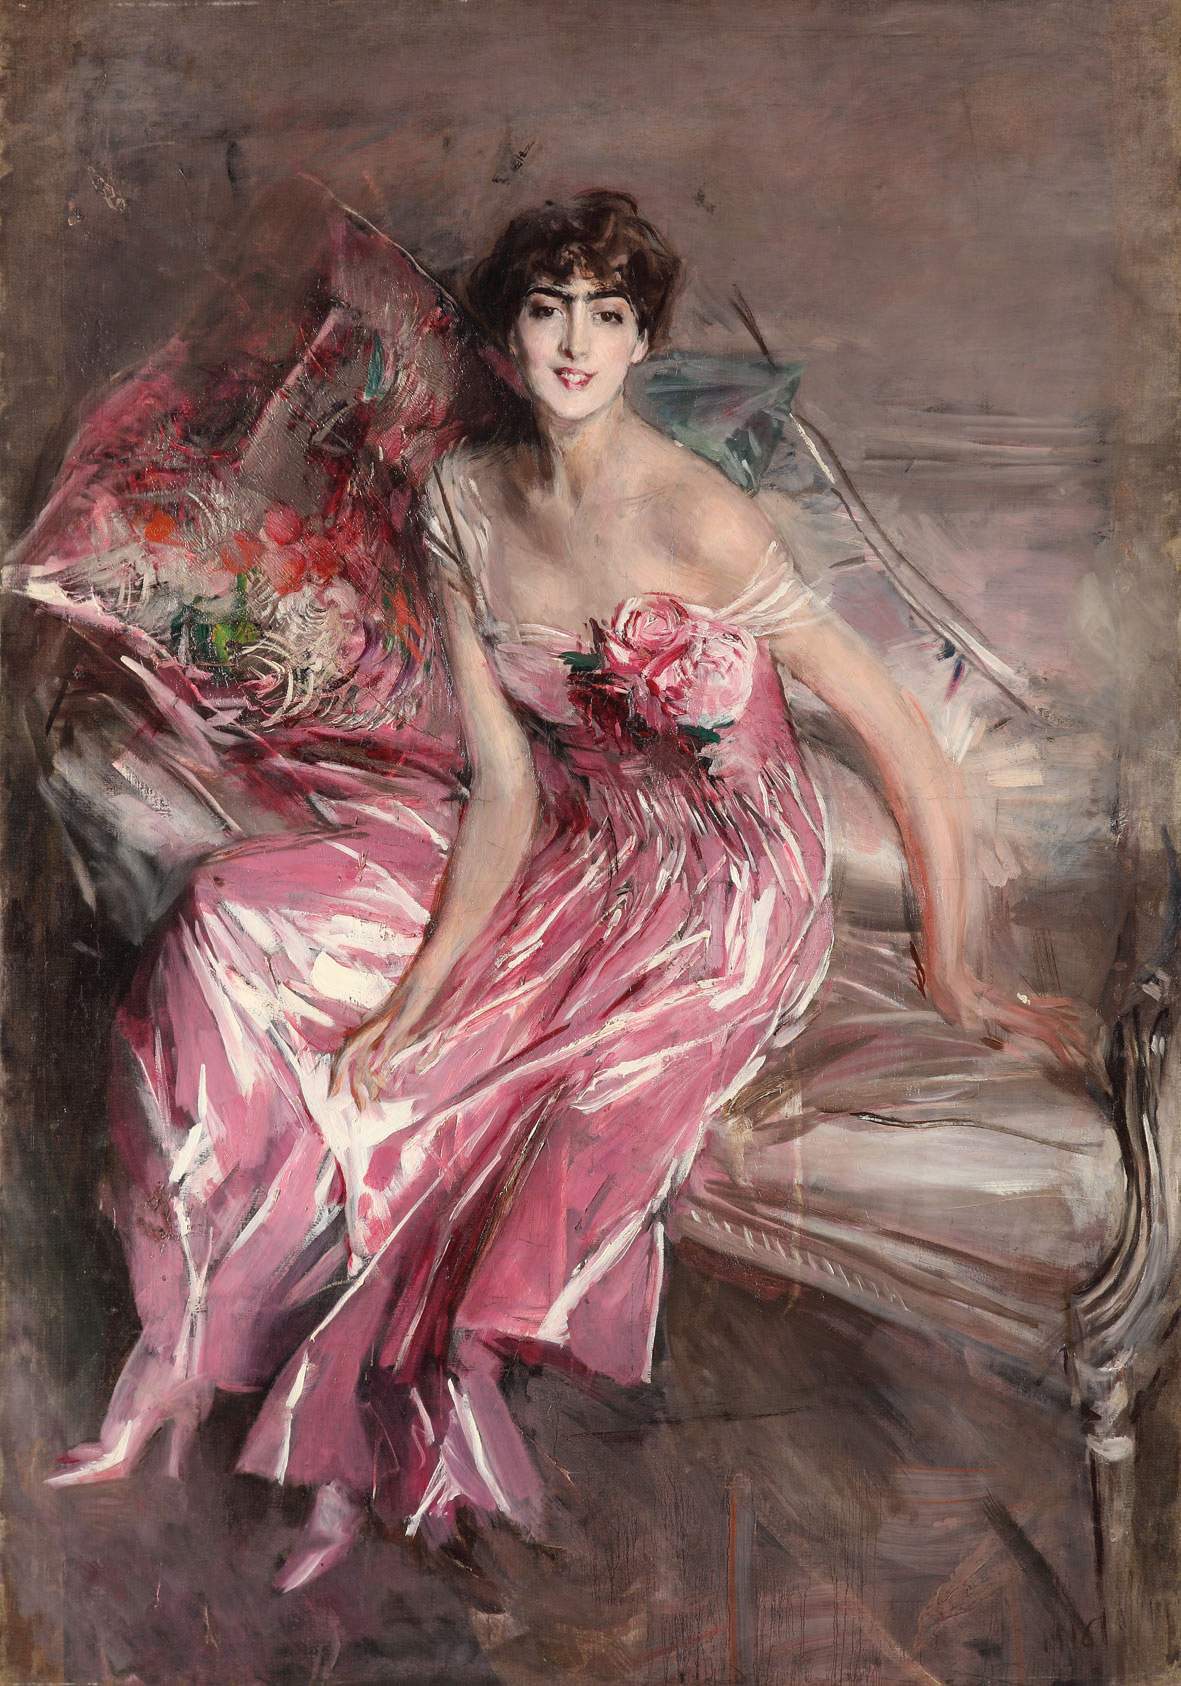 An exhibition on Giovanni Boldini in Puglia with works coming from Ferrara